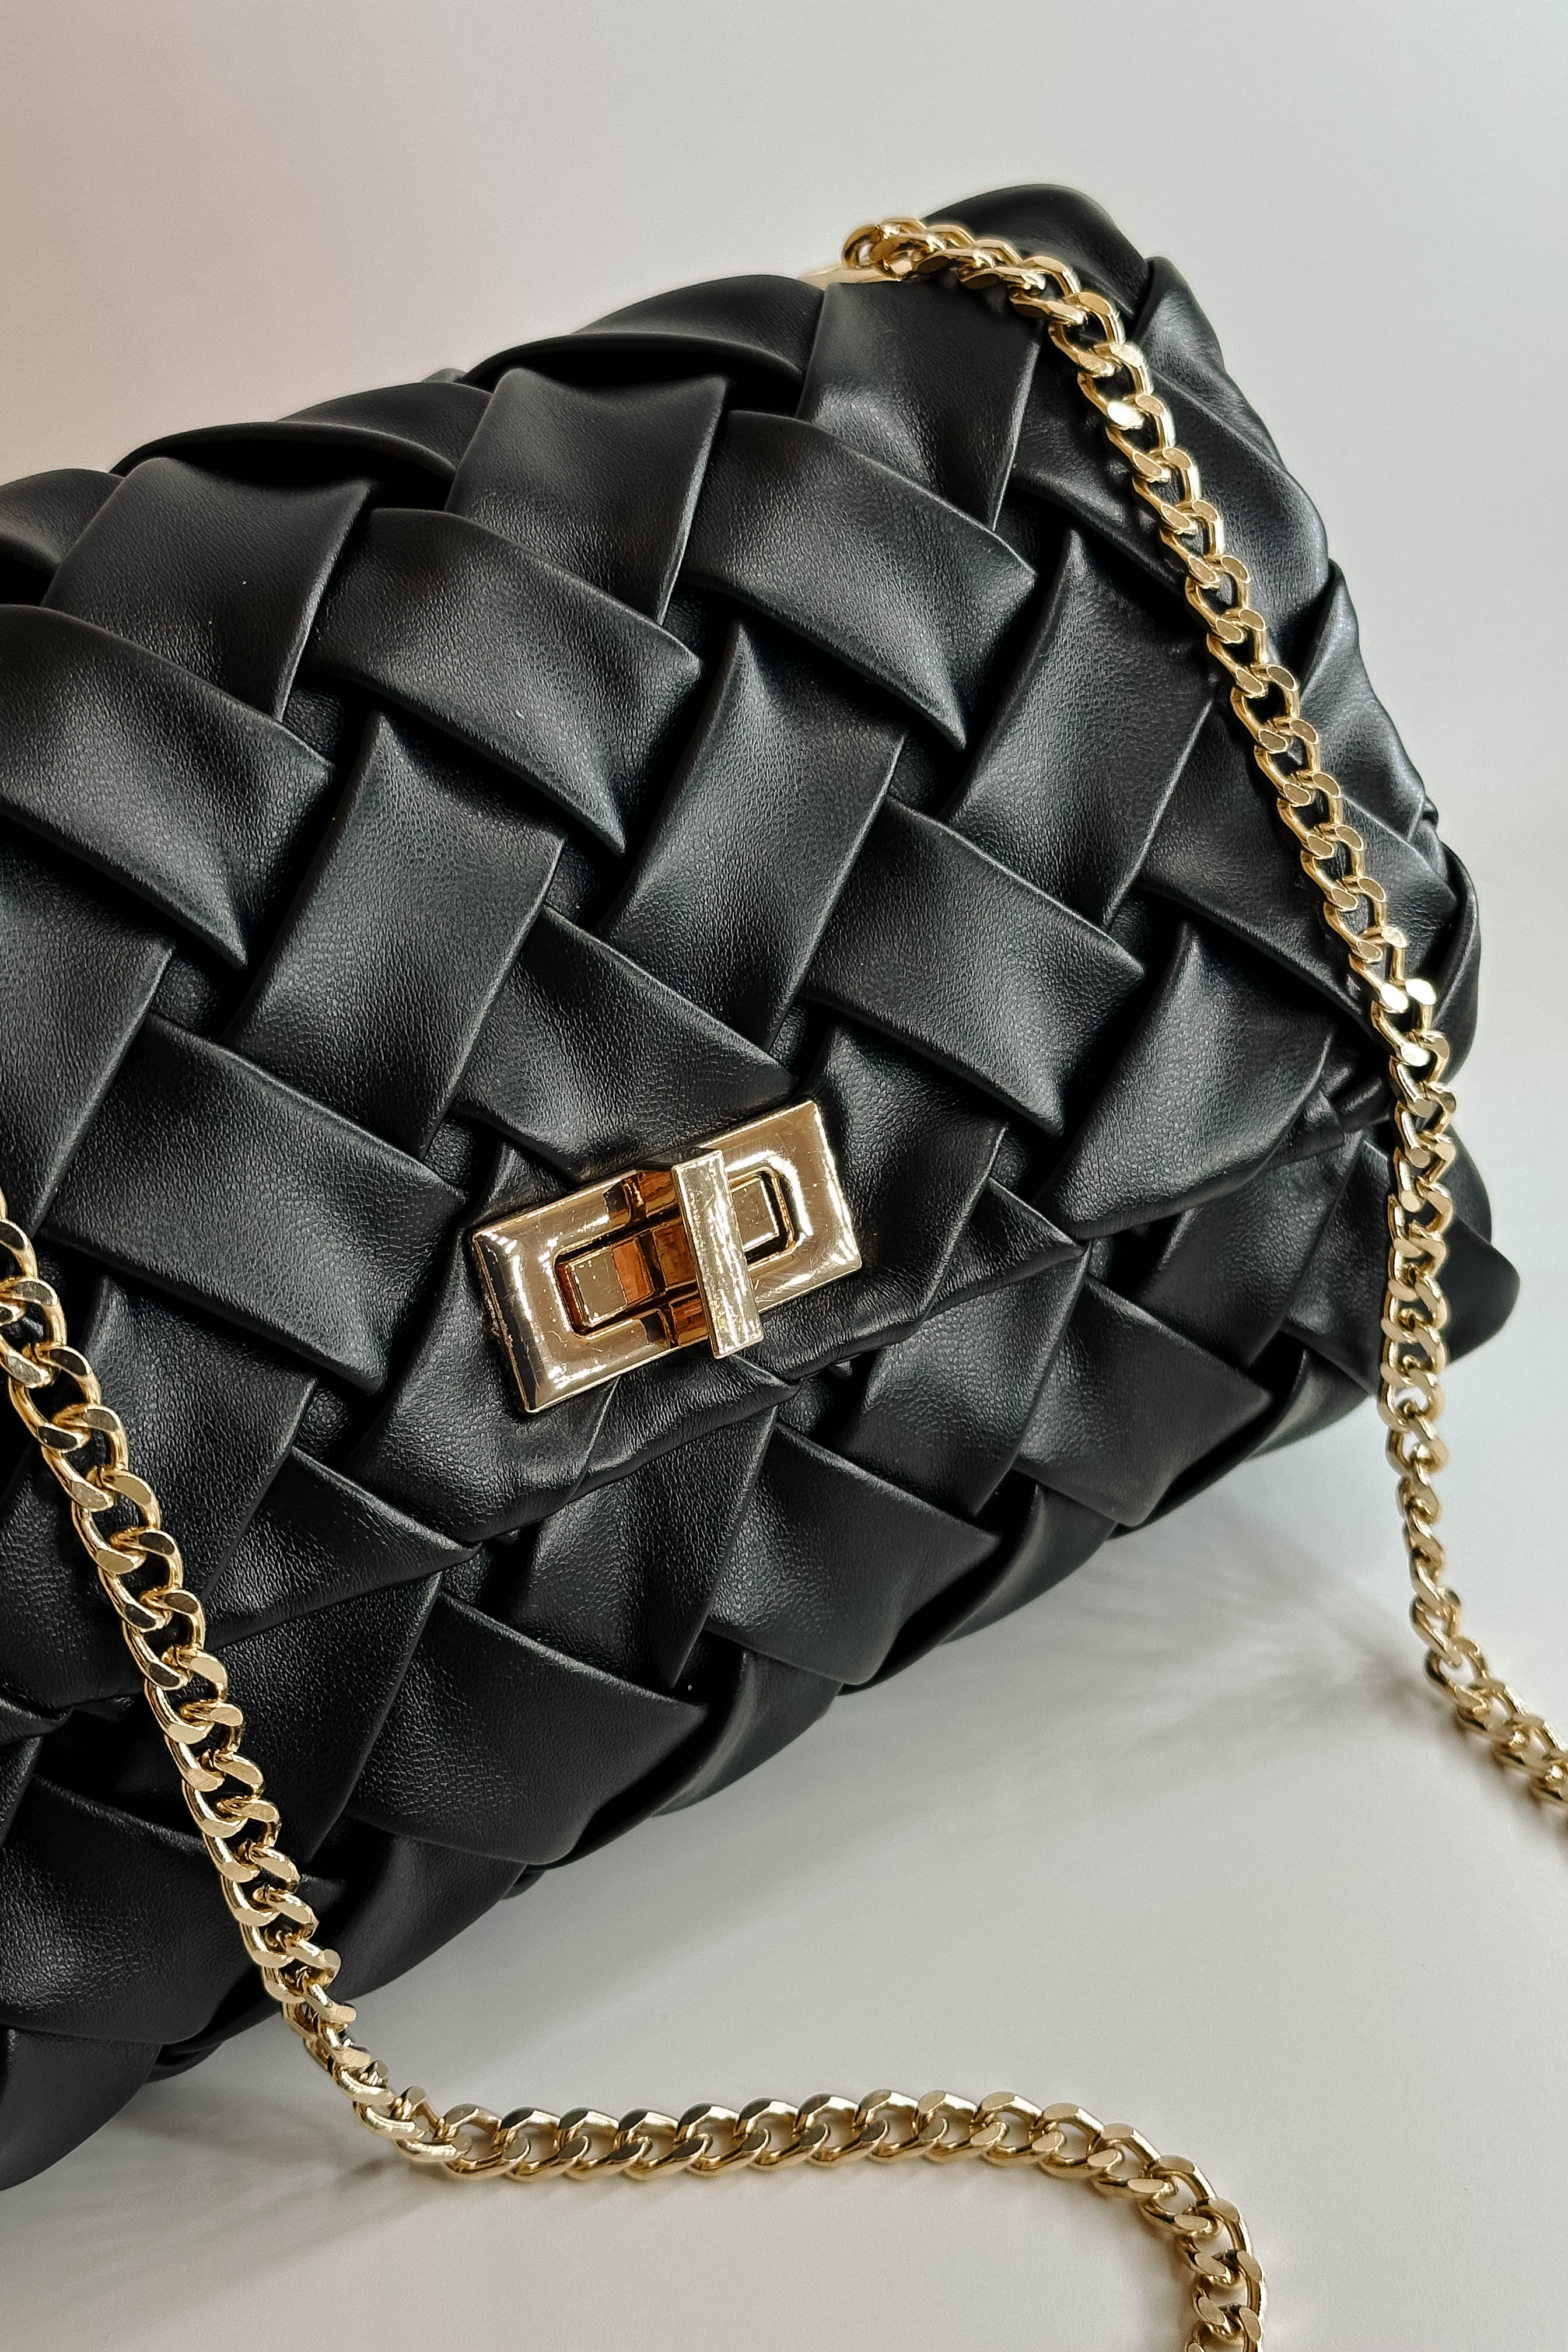 Close up view of the Carrie Black Leather Woven Purse which features black woven leather fabric, gold button closure and gold chain link strap.